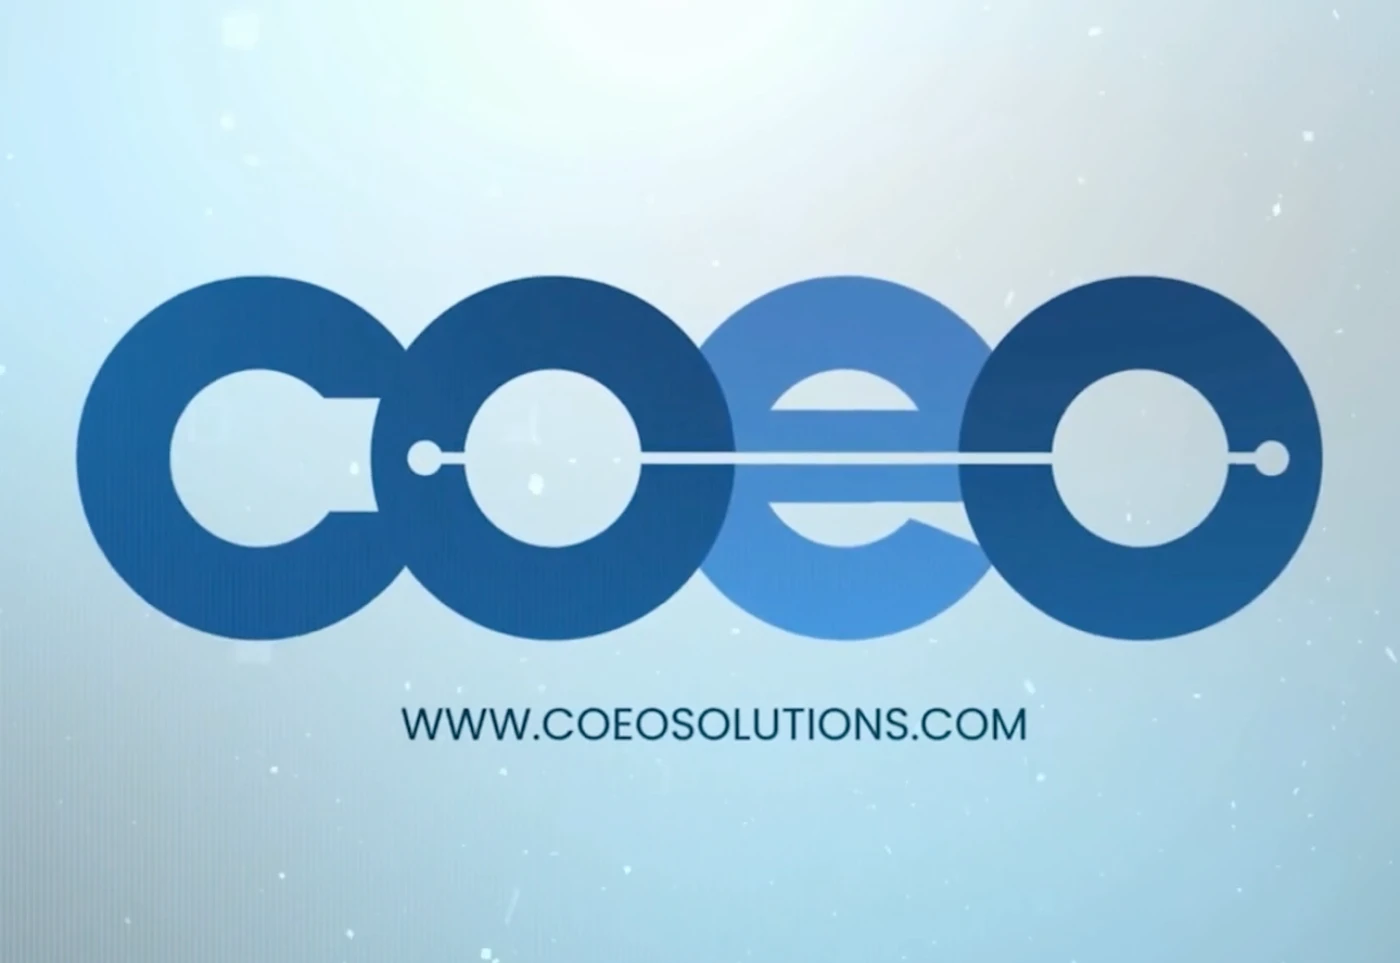 Teams Direct Routing Through Coeo Solutions